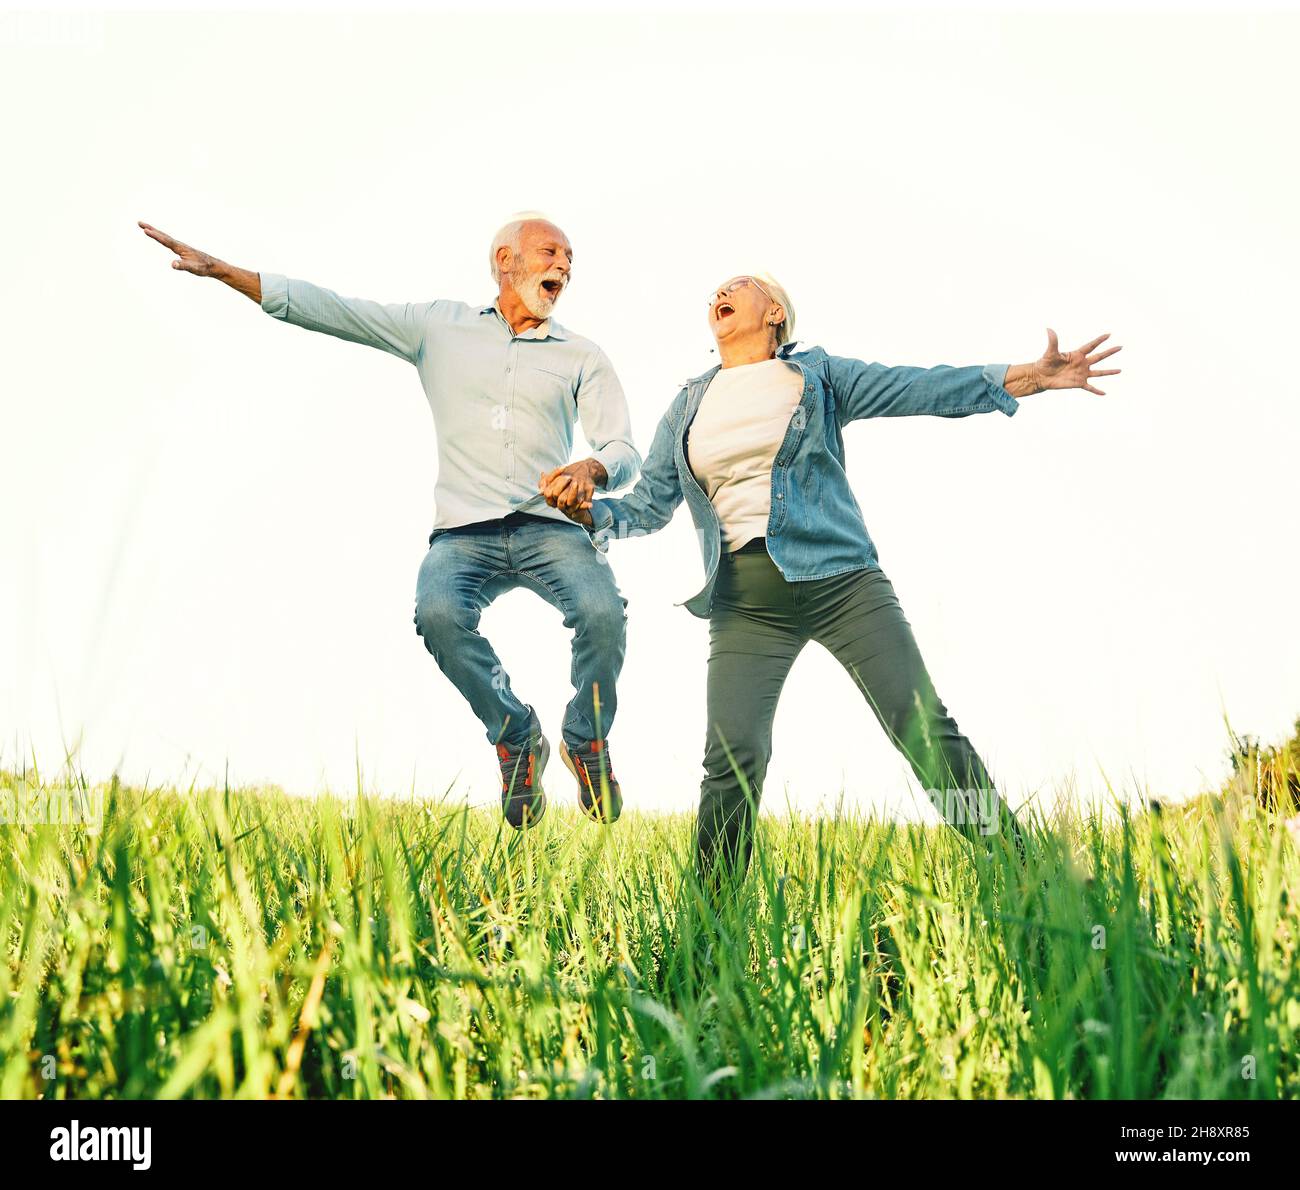 woman man outdoor senior couple happy lifestyle retirement together love jumping fun nature mature Stock Photo